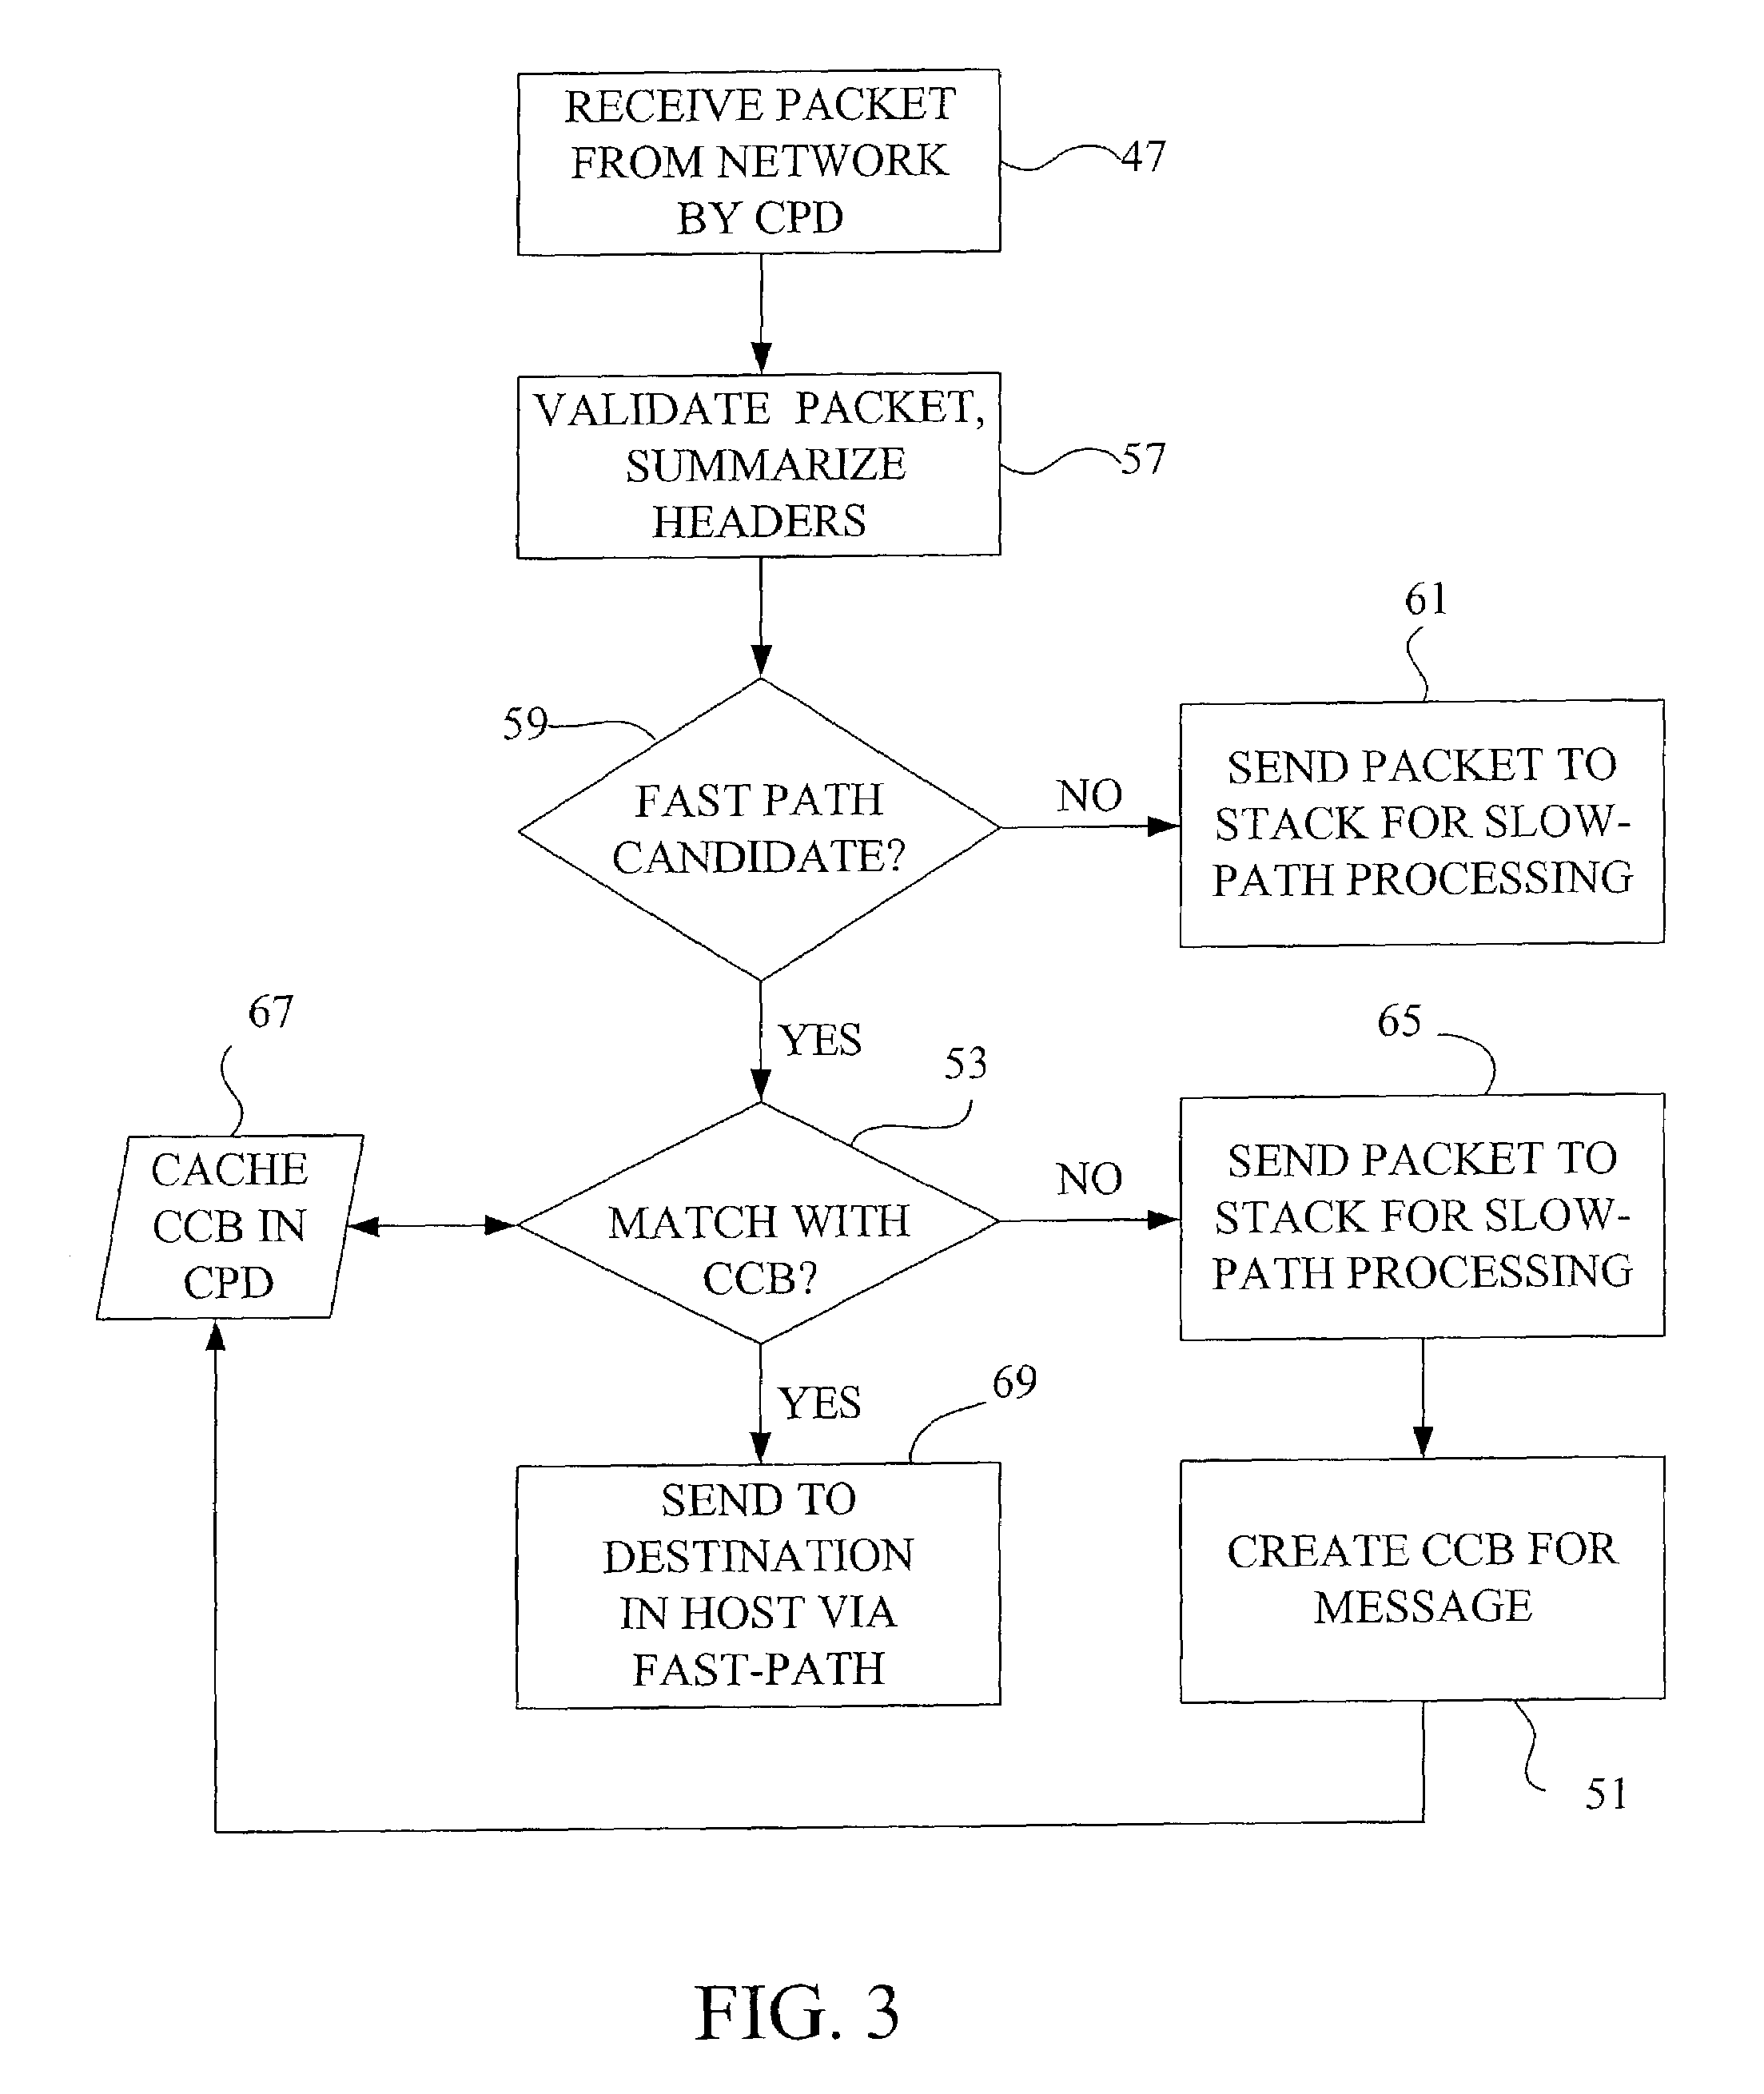 Fast-path apparatus for receiving data corresponding a TCP connection